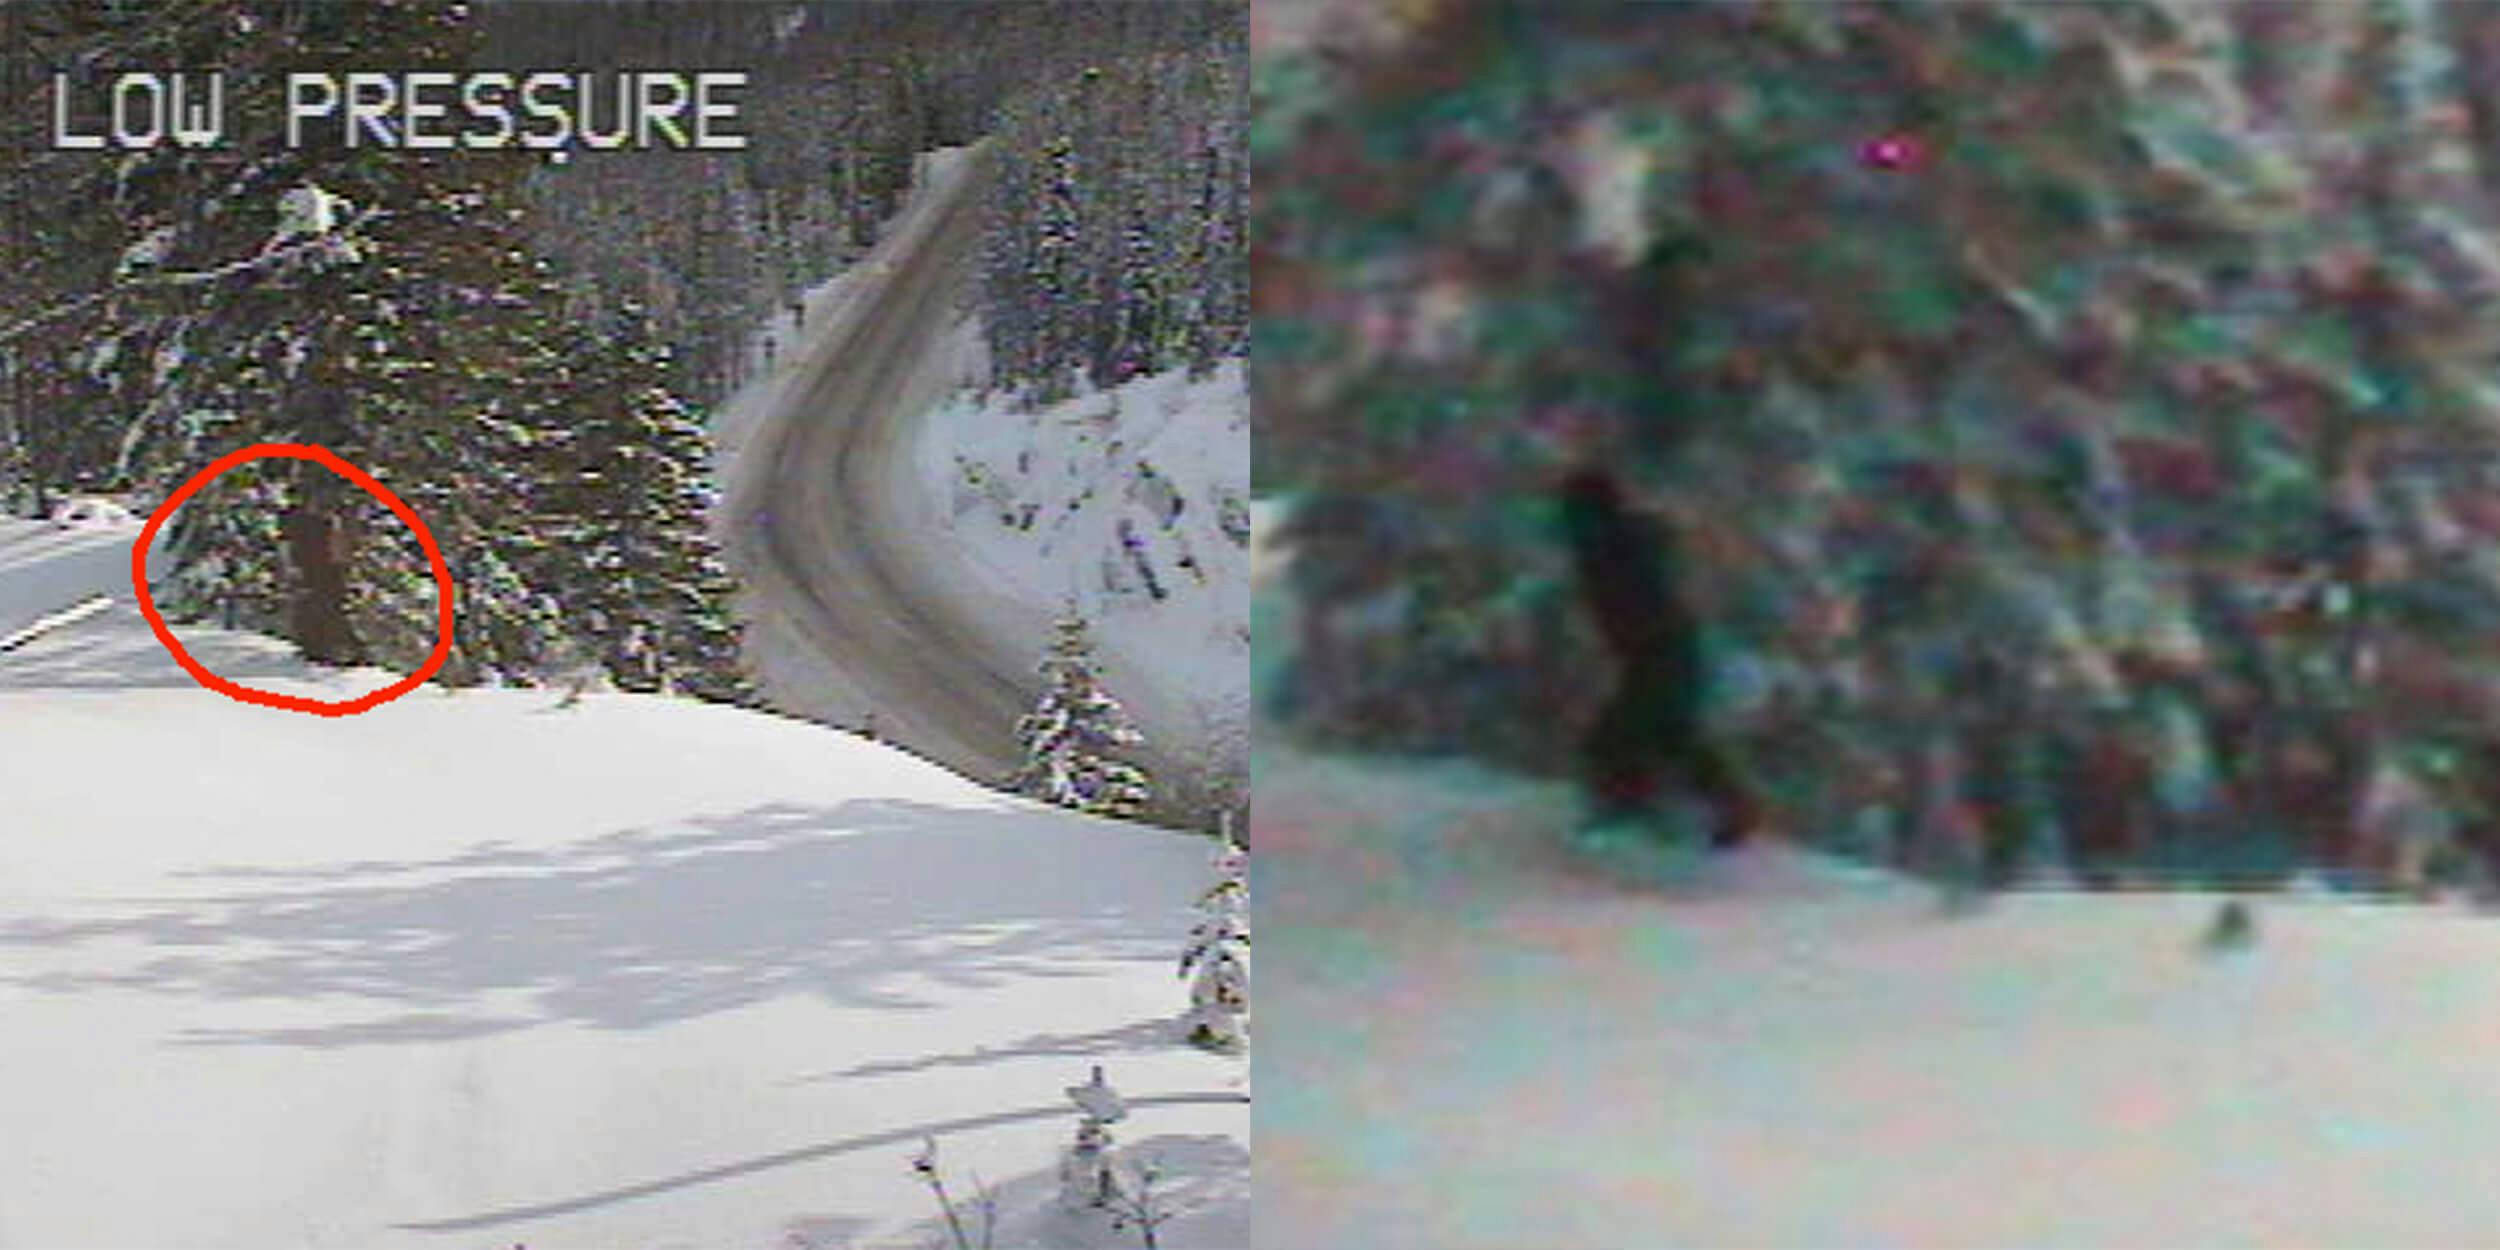 Webcam footage of ‘Bigfoot’ shared by state government agency